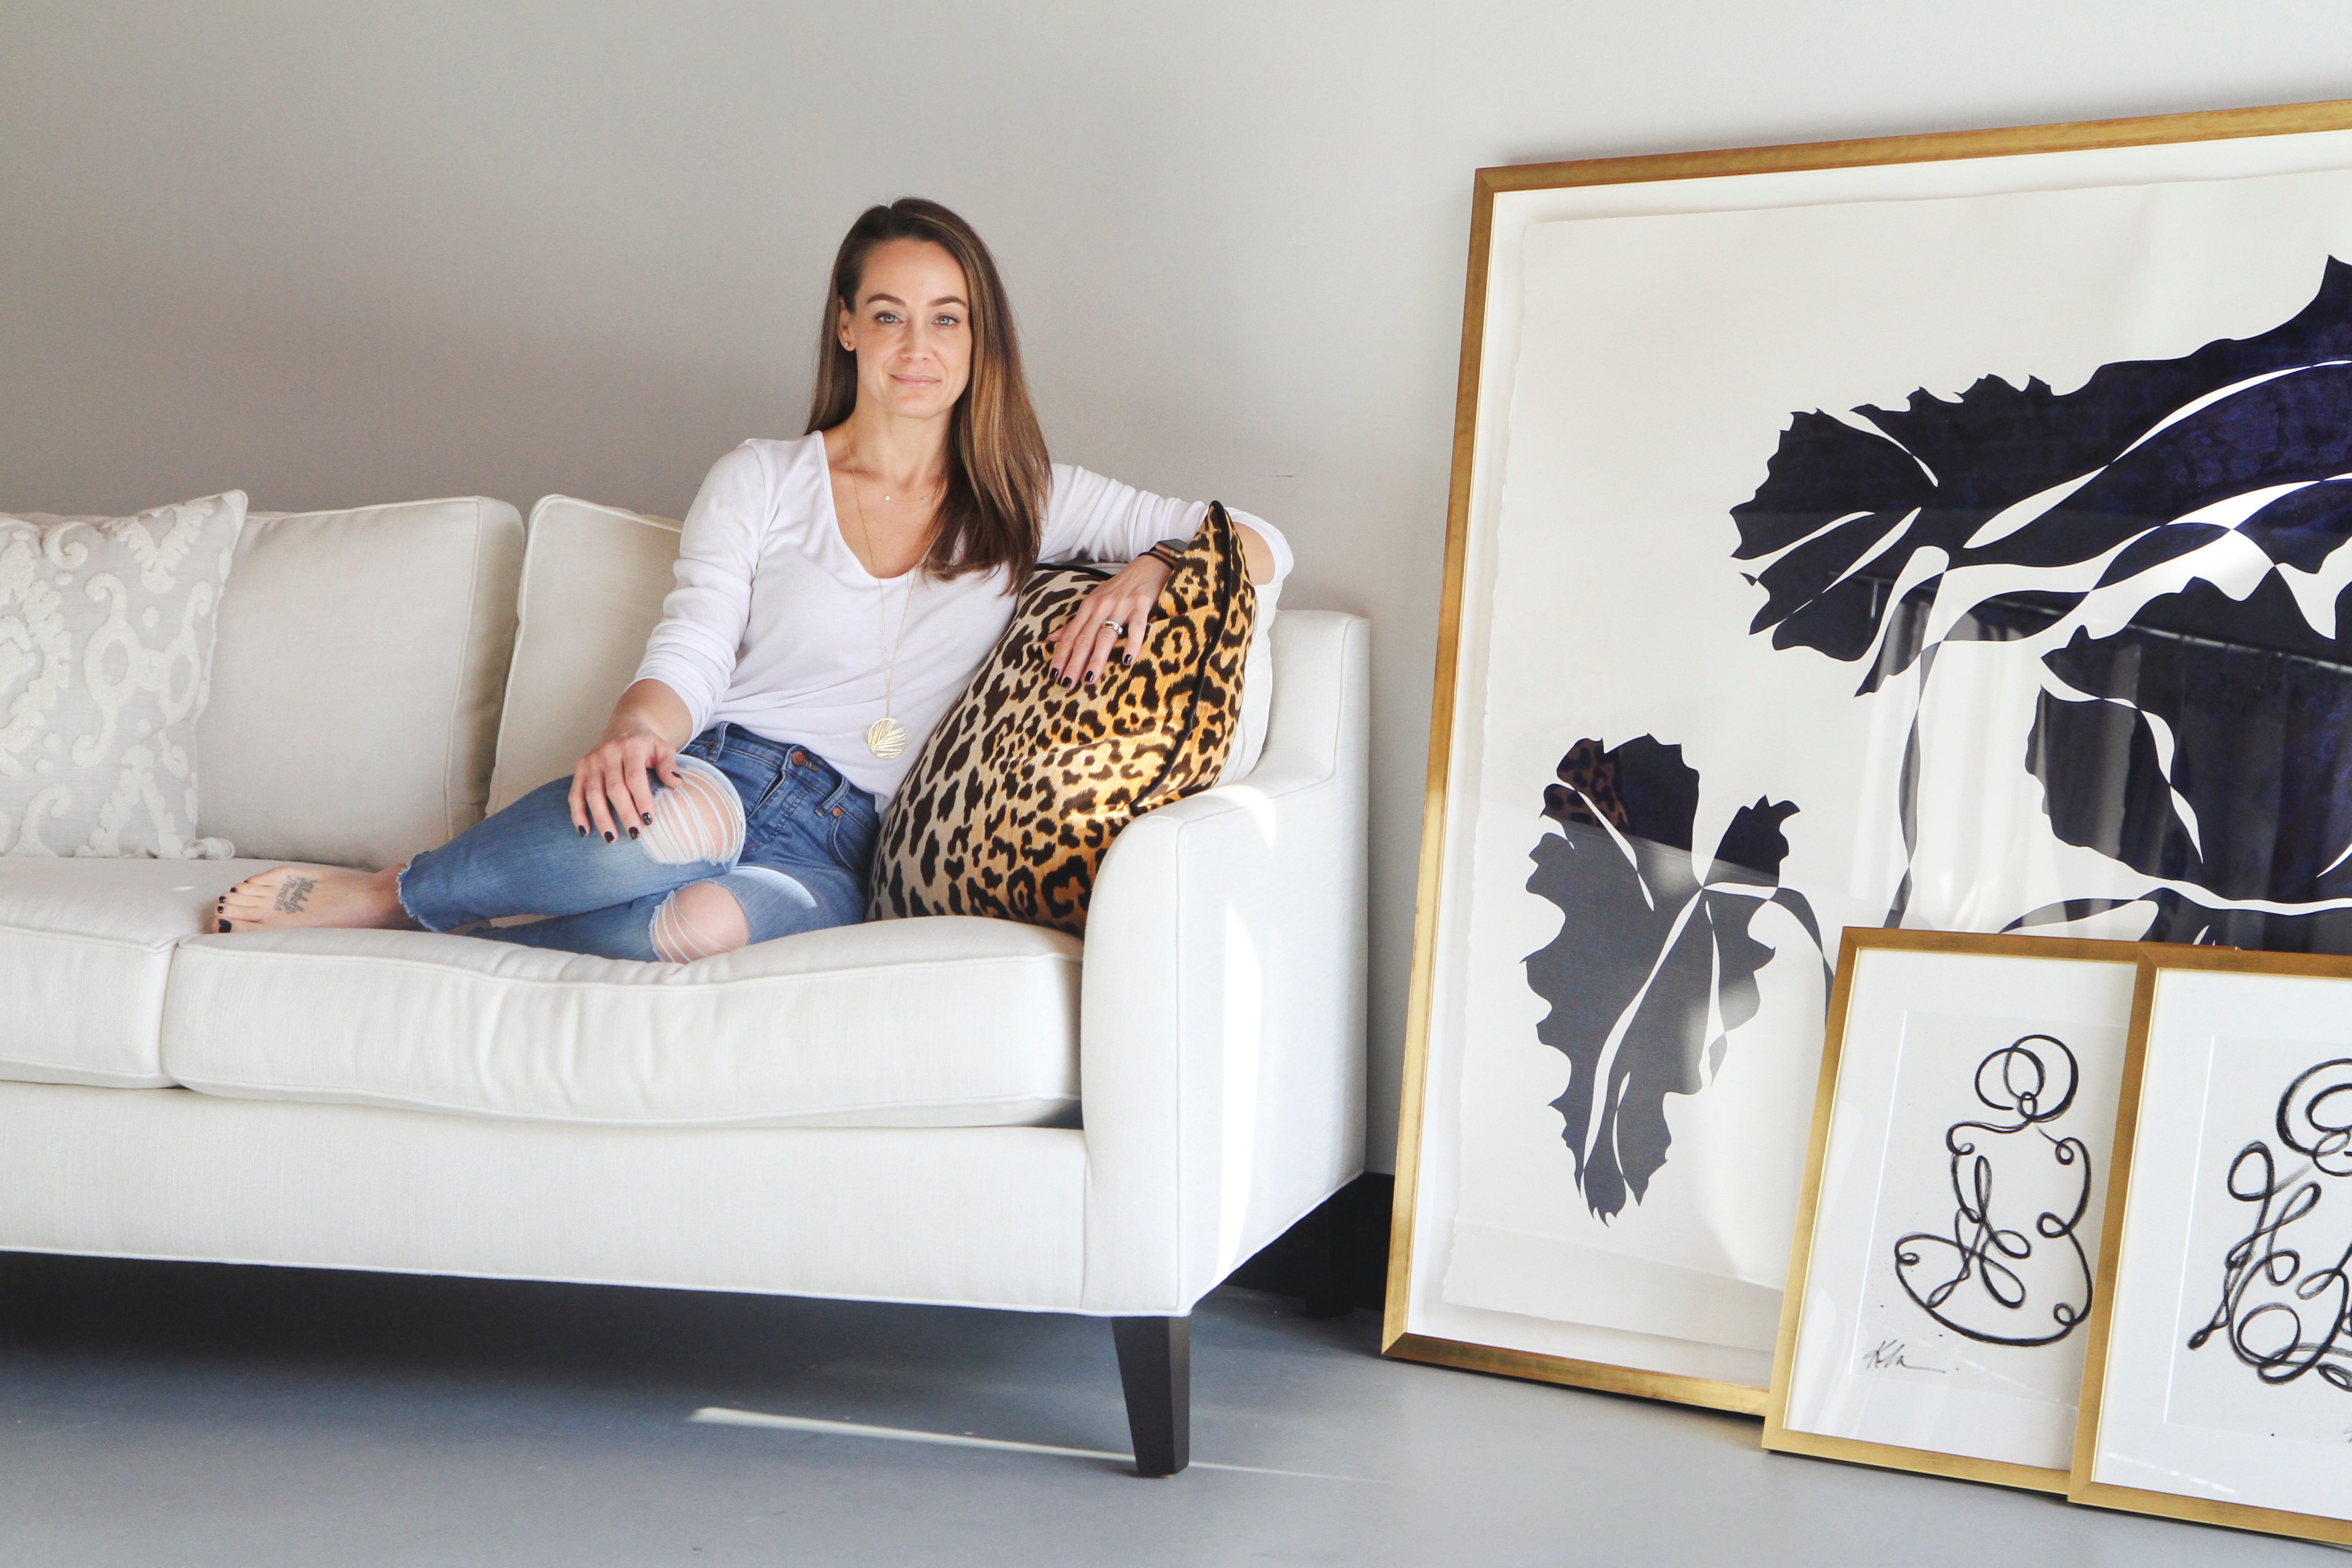 Brunette woman sitting on a white couch next to large pieces of modern artwork